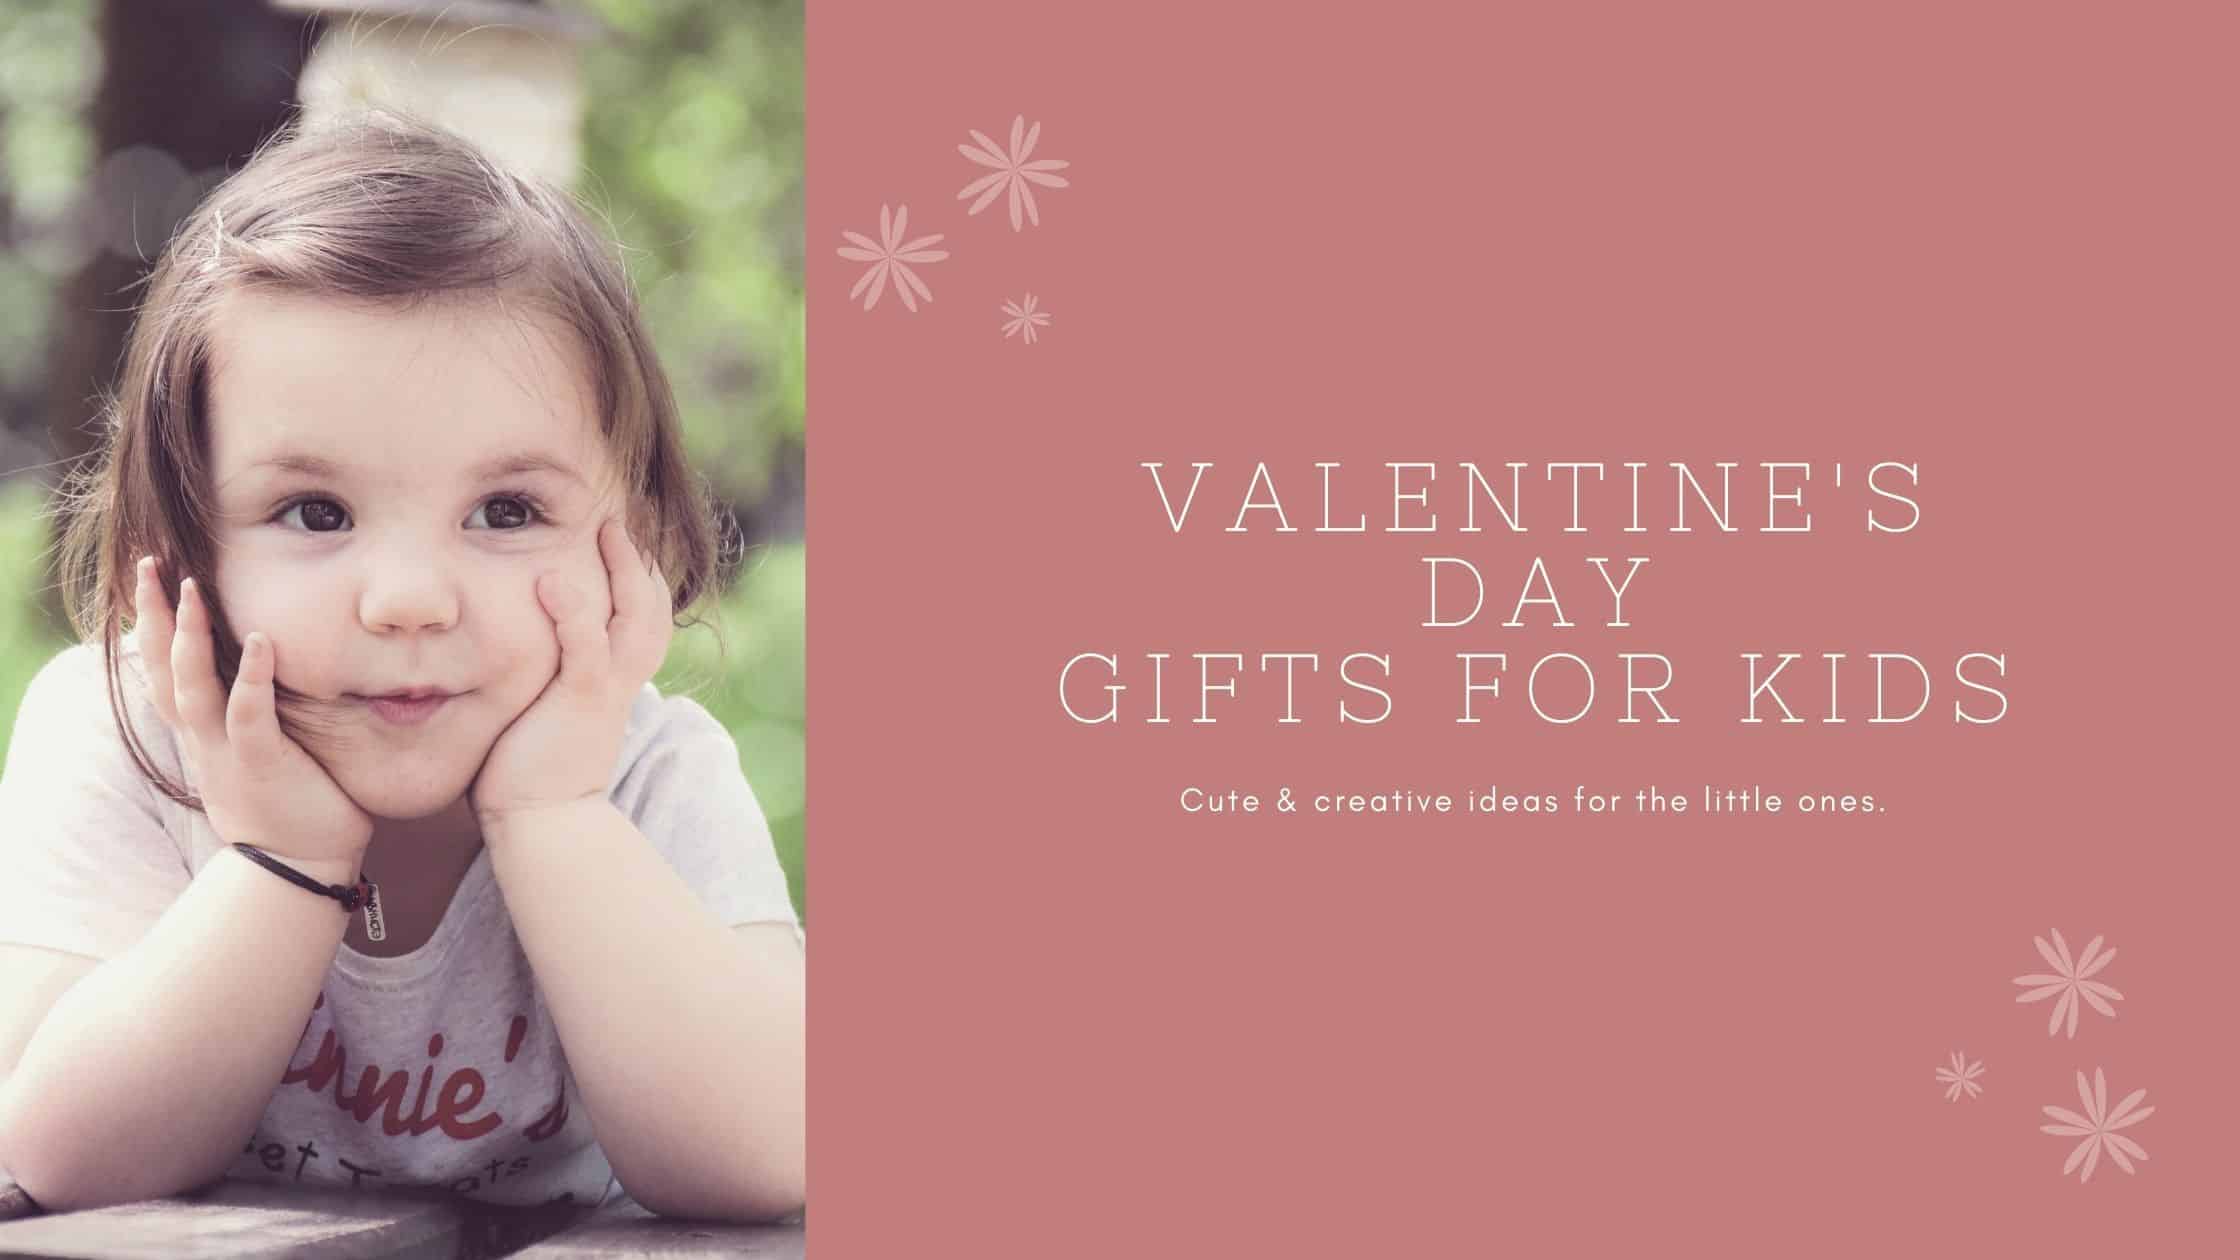 40+ Best Valentine’s Day Gifts for Kids in 2022